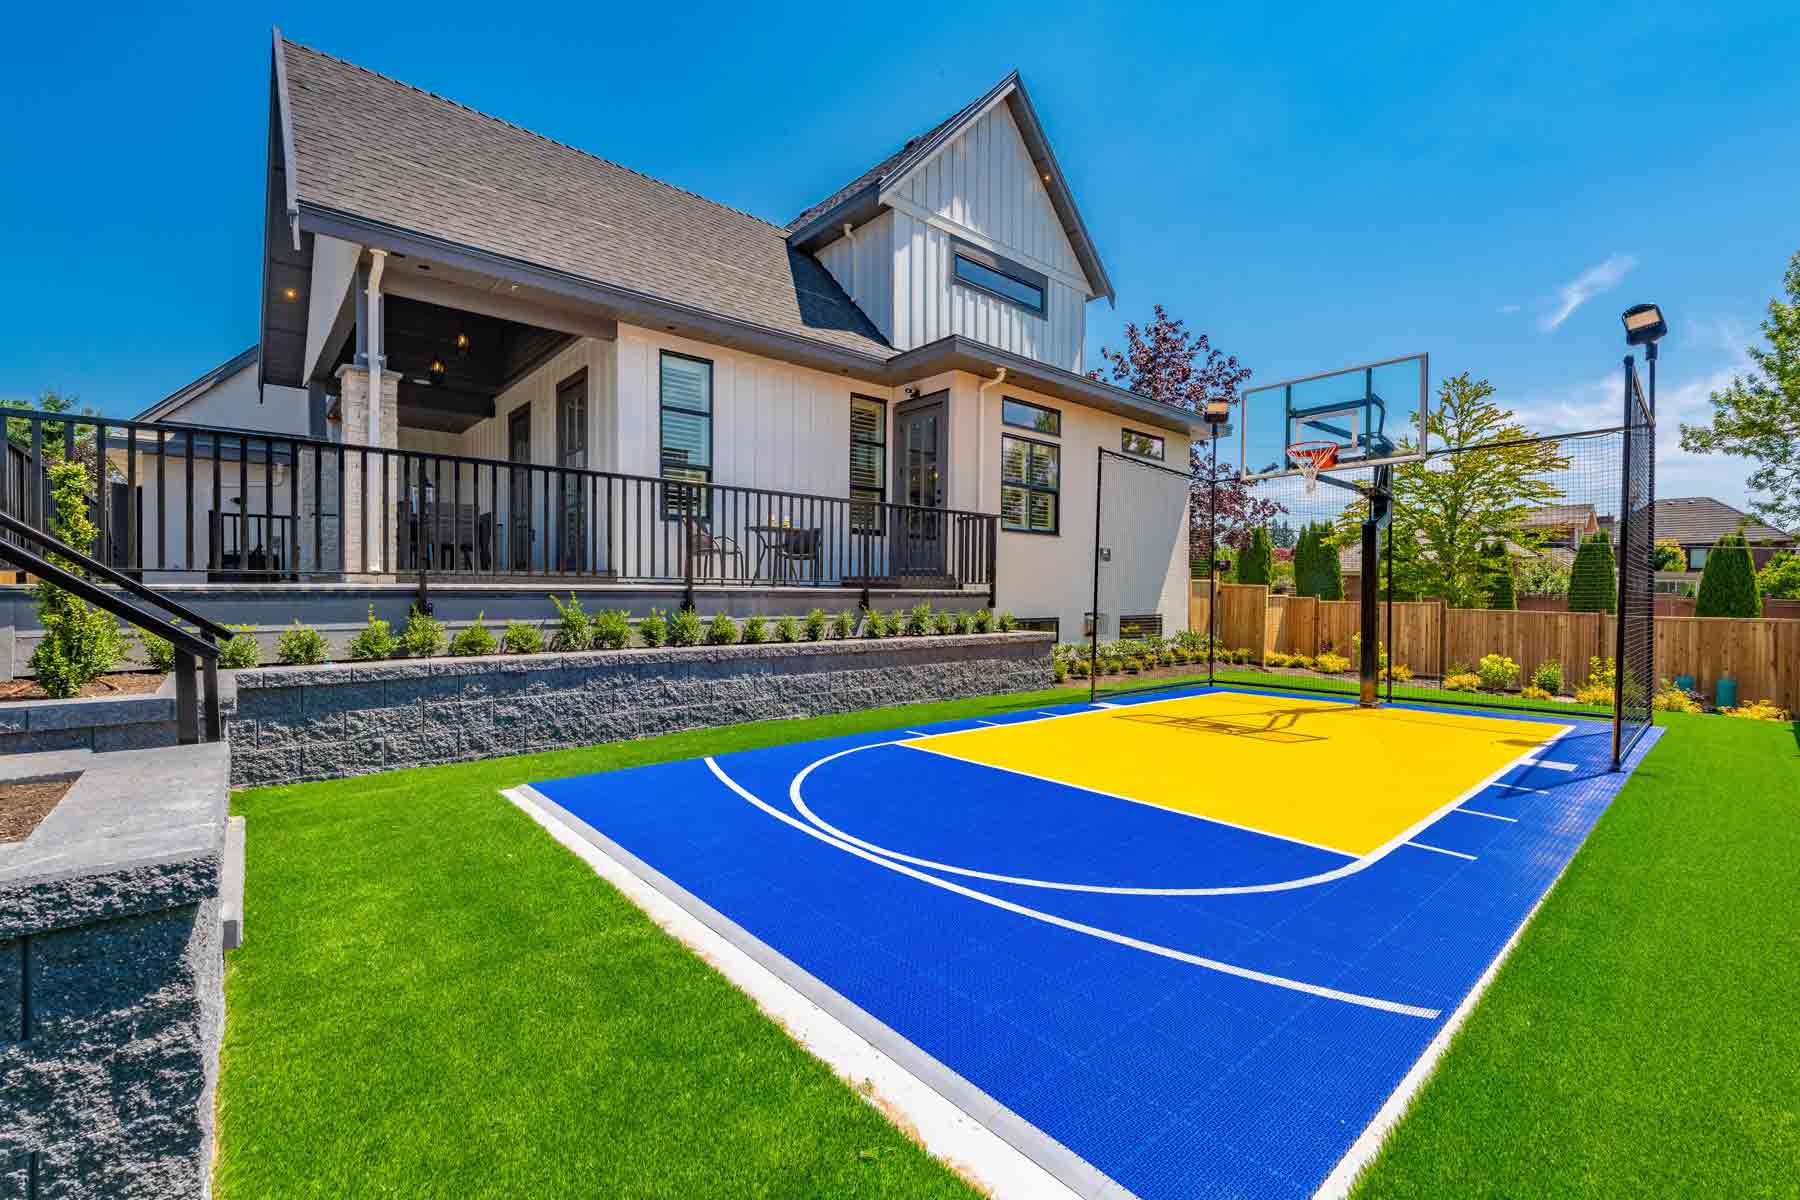 How Much Does A Backyard Basketball Court Cost